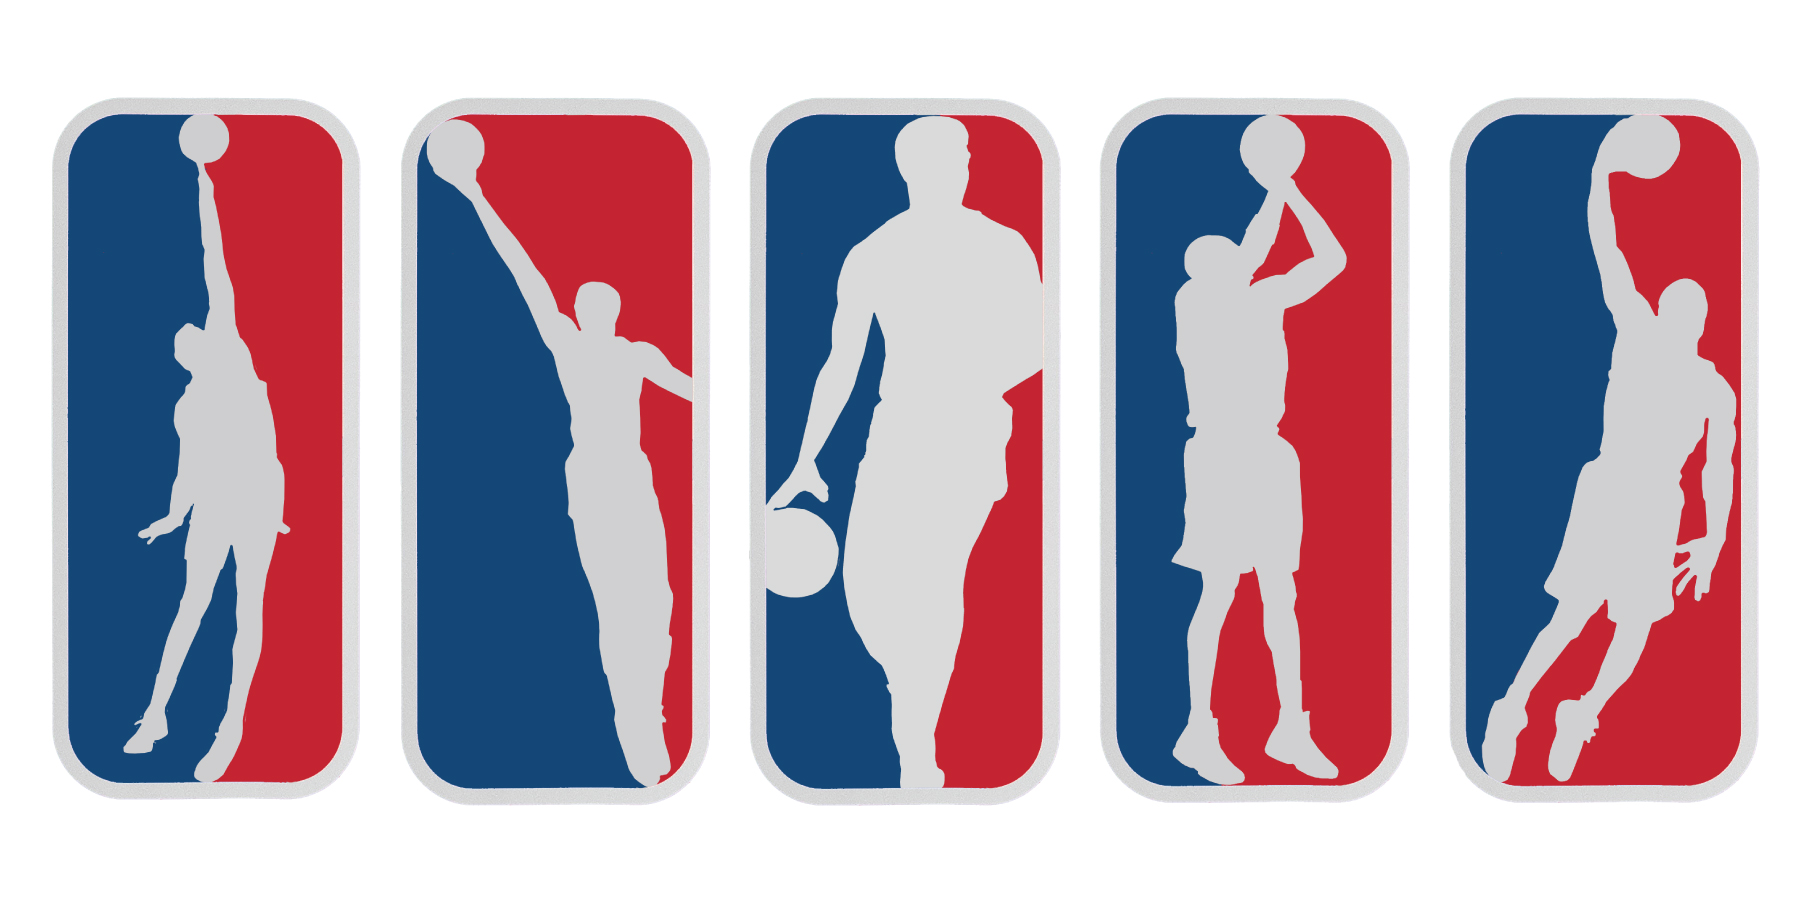 Jerry West, NBA logo, wants no part of the debate as some demand a new look